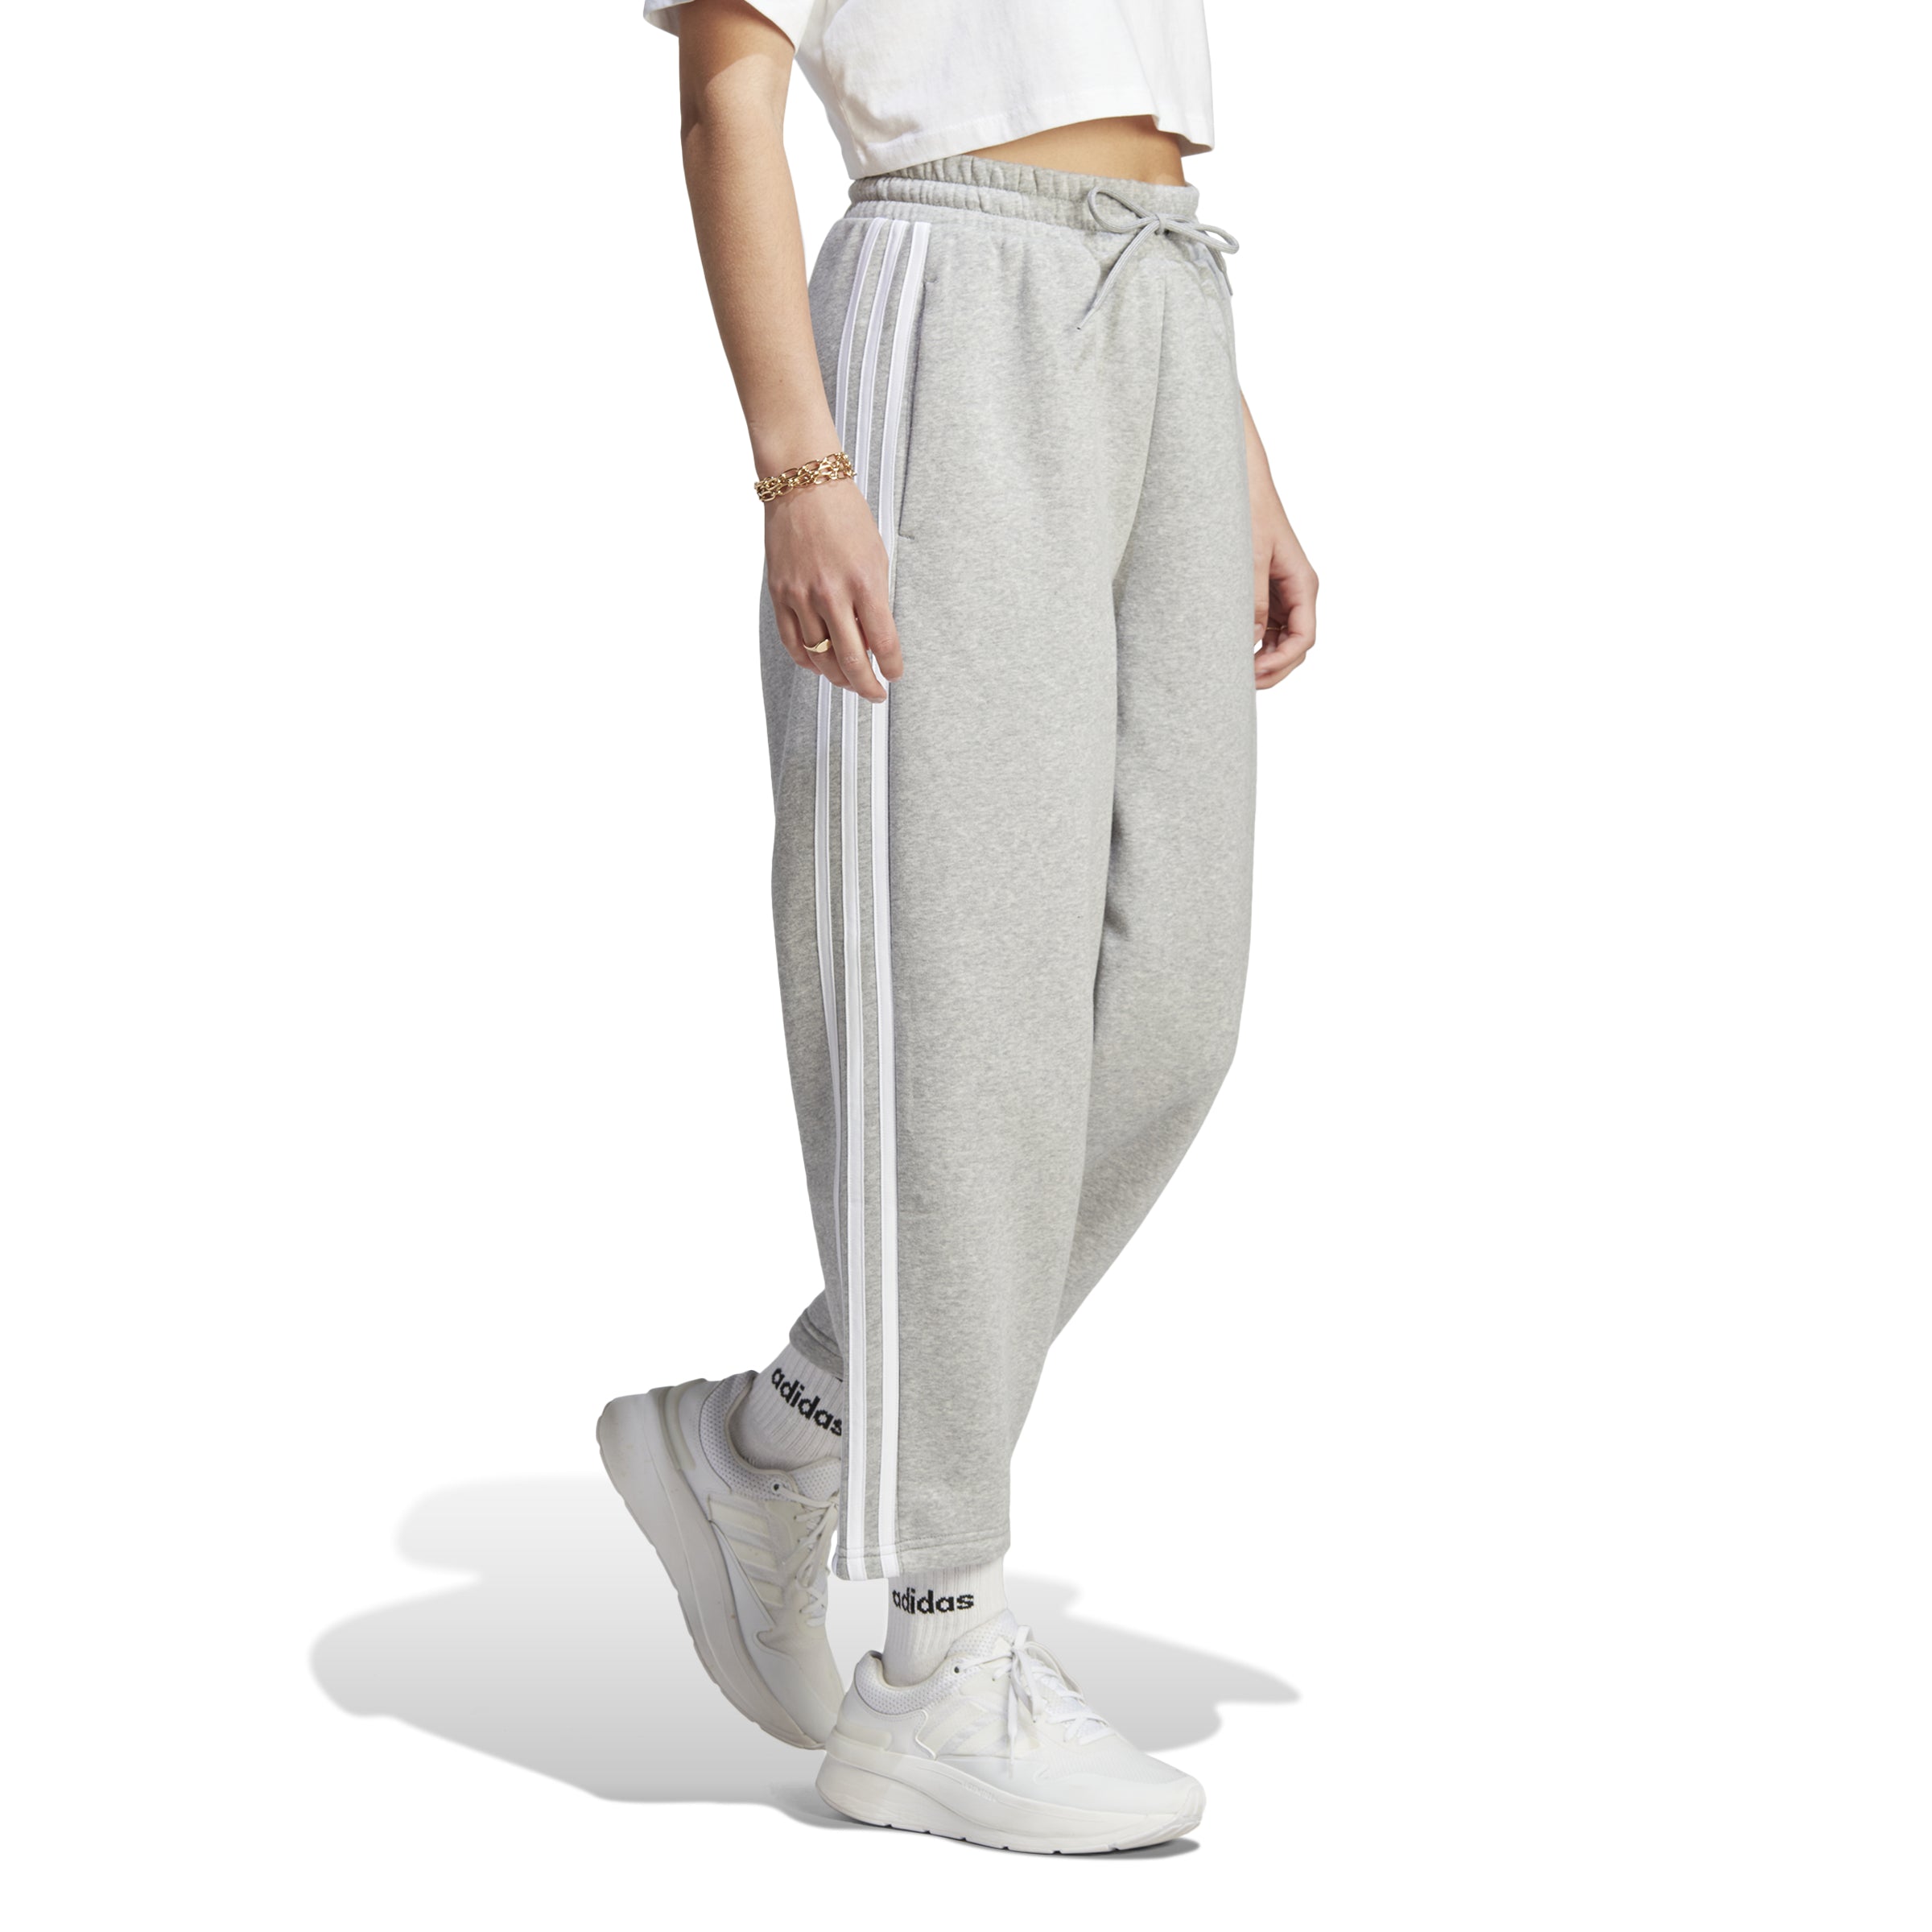  adidas Women's Essentials 3-Stripes Fleece Pants, Black/White,  X-Small : Clothing, Shoes & Jewelry